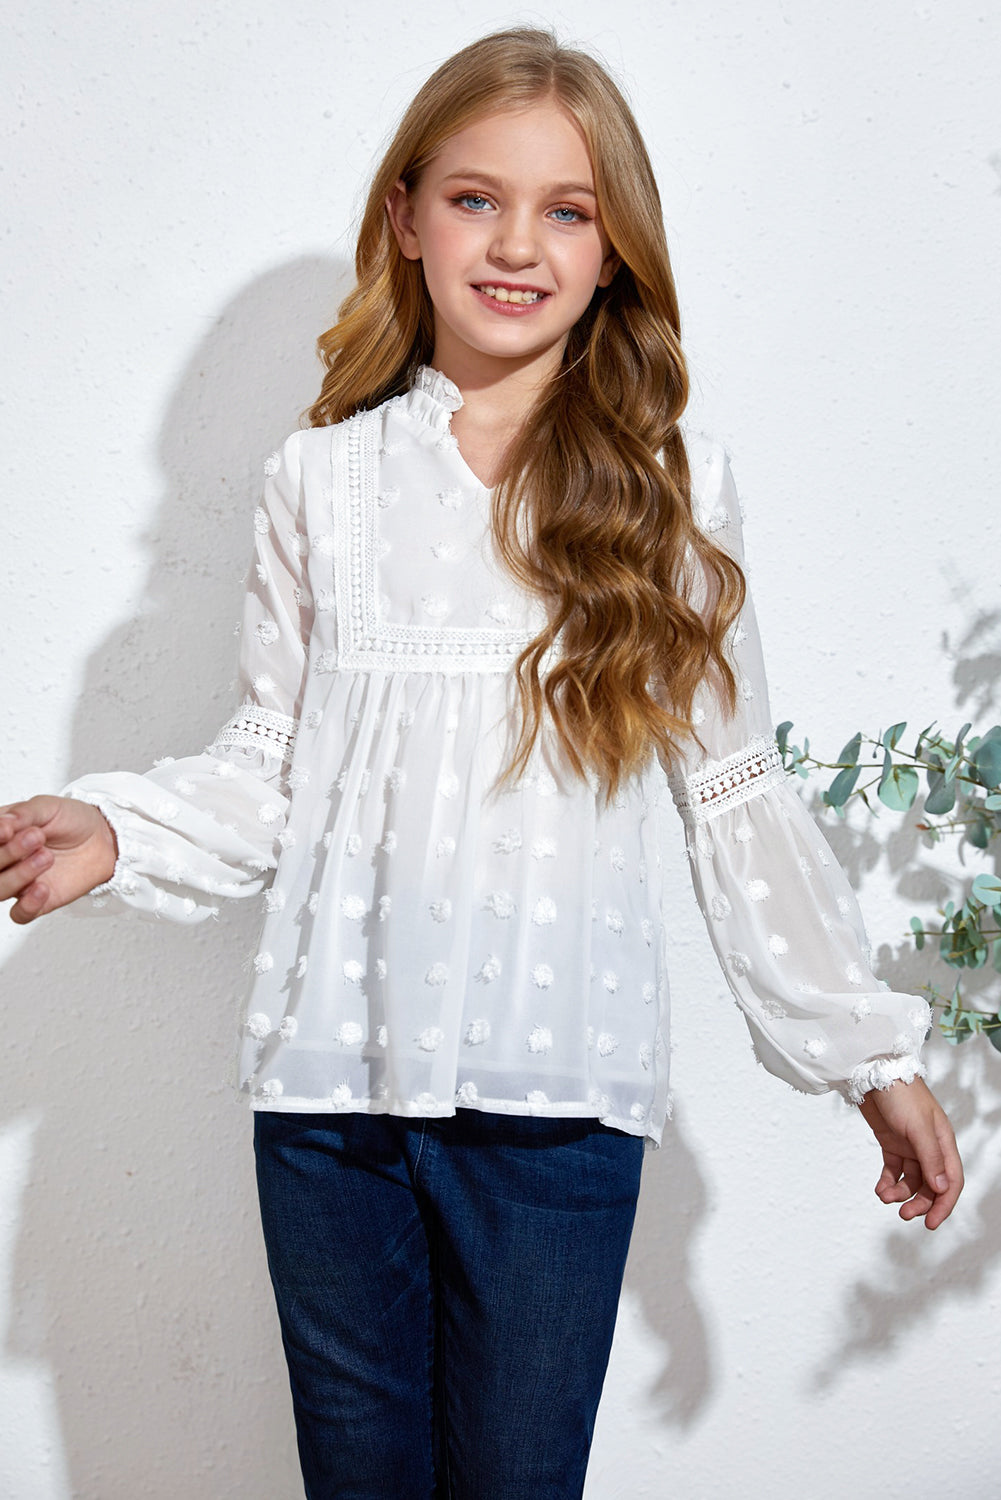 Uylee's Boutique Girls Swiss Dot Spliced Lace Notched Blouse